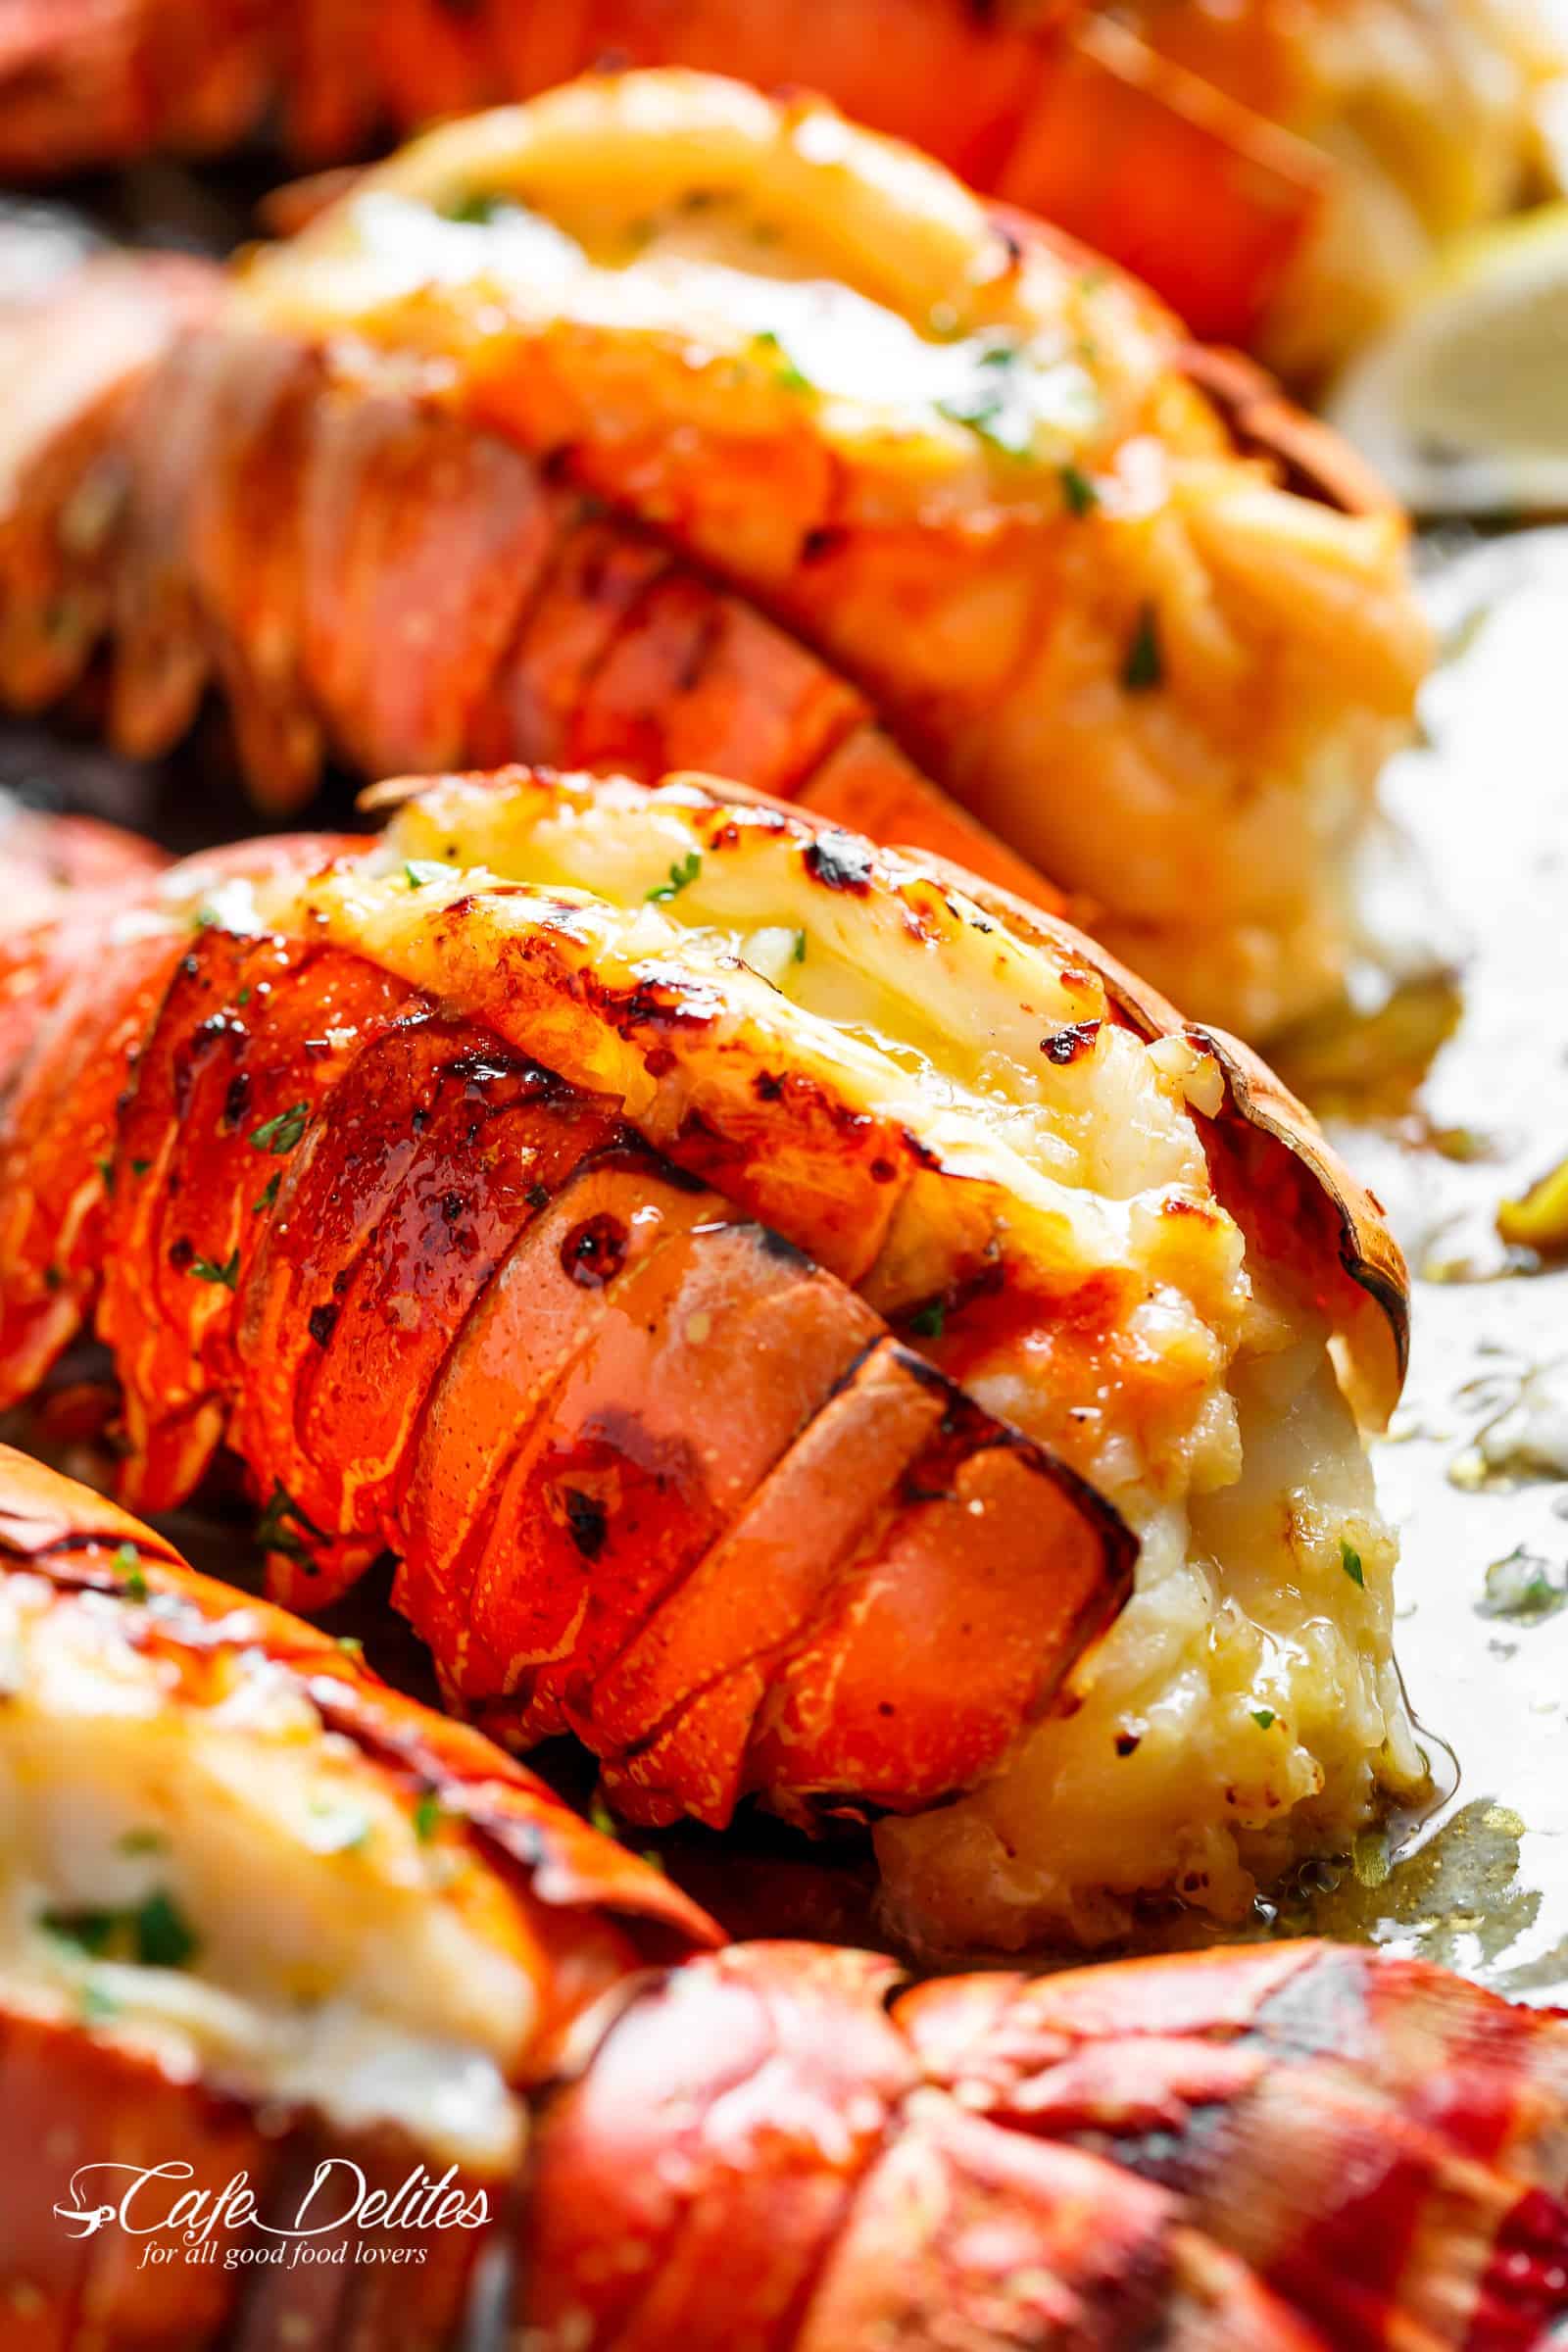 Baked Lobster Tail Recipe (With Lemon Garlic Butter)